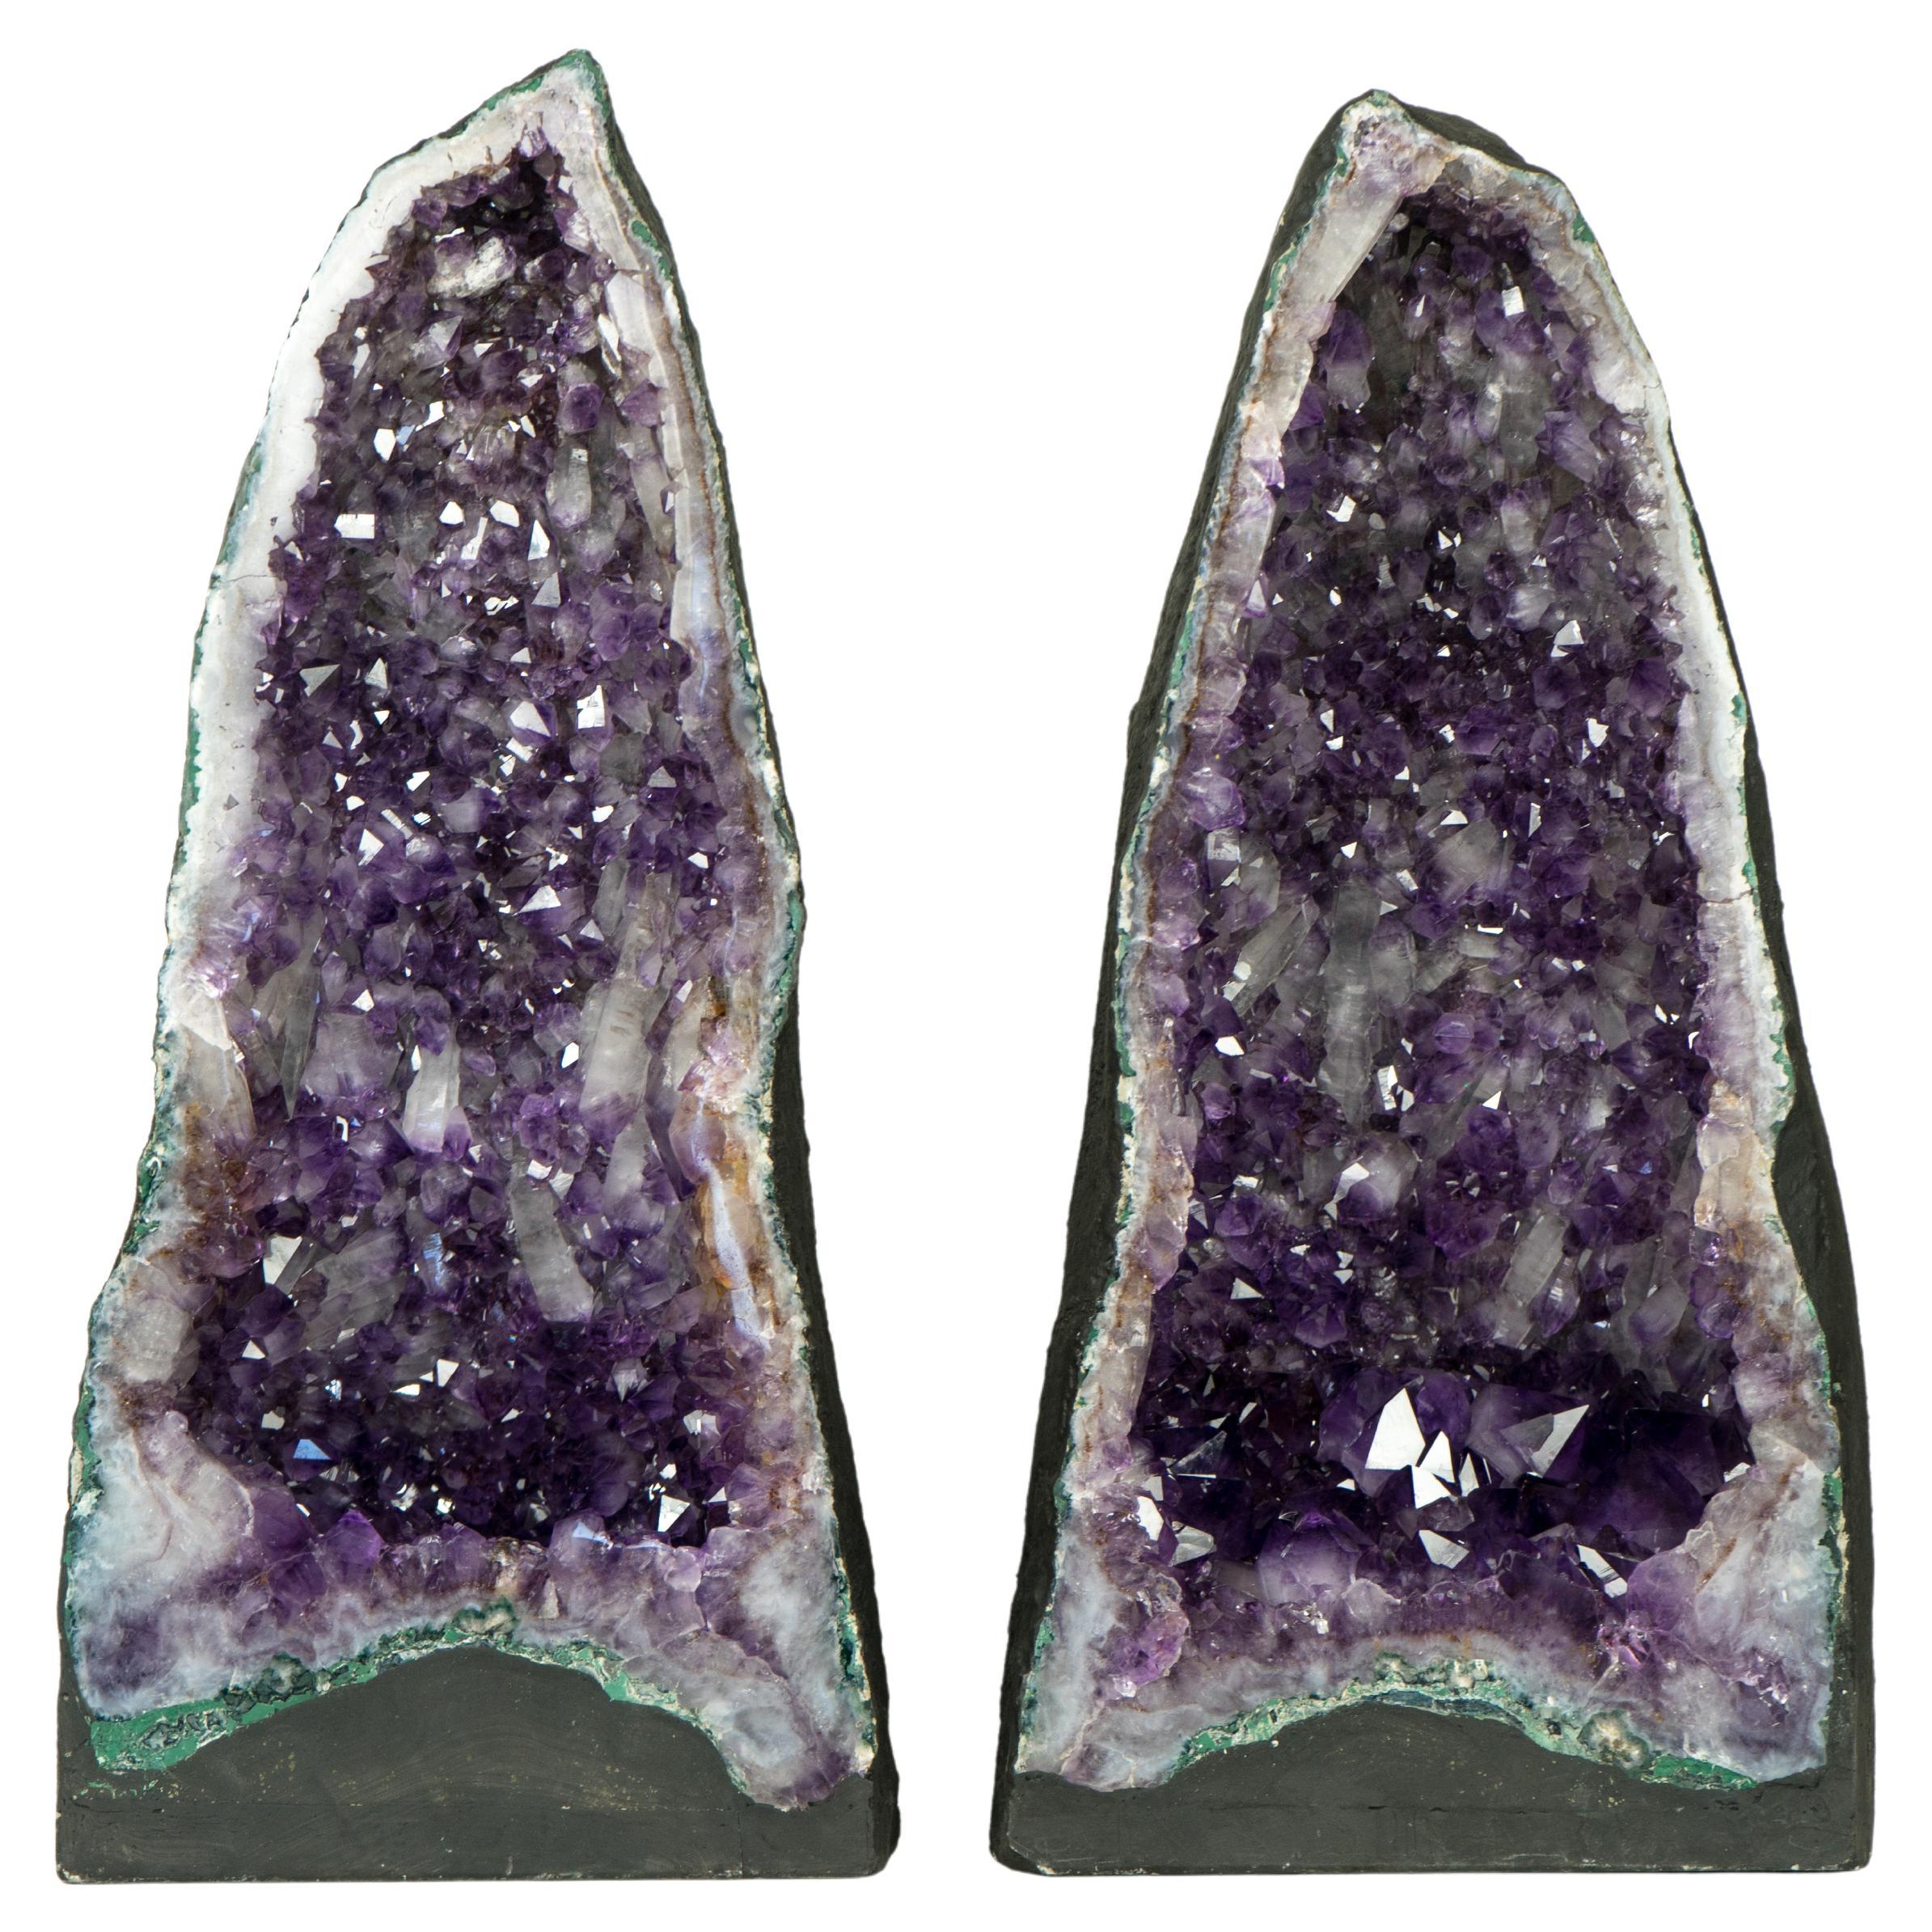 Pair of Tall Deep Purple Amethyst Crystal Geode Cathedrals, with Rare Druzy For Sale